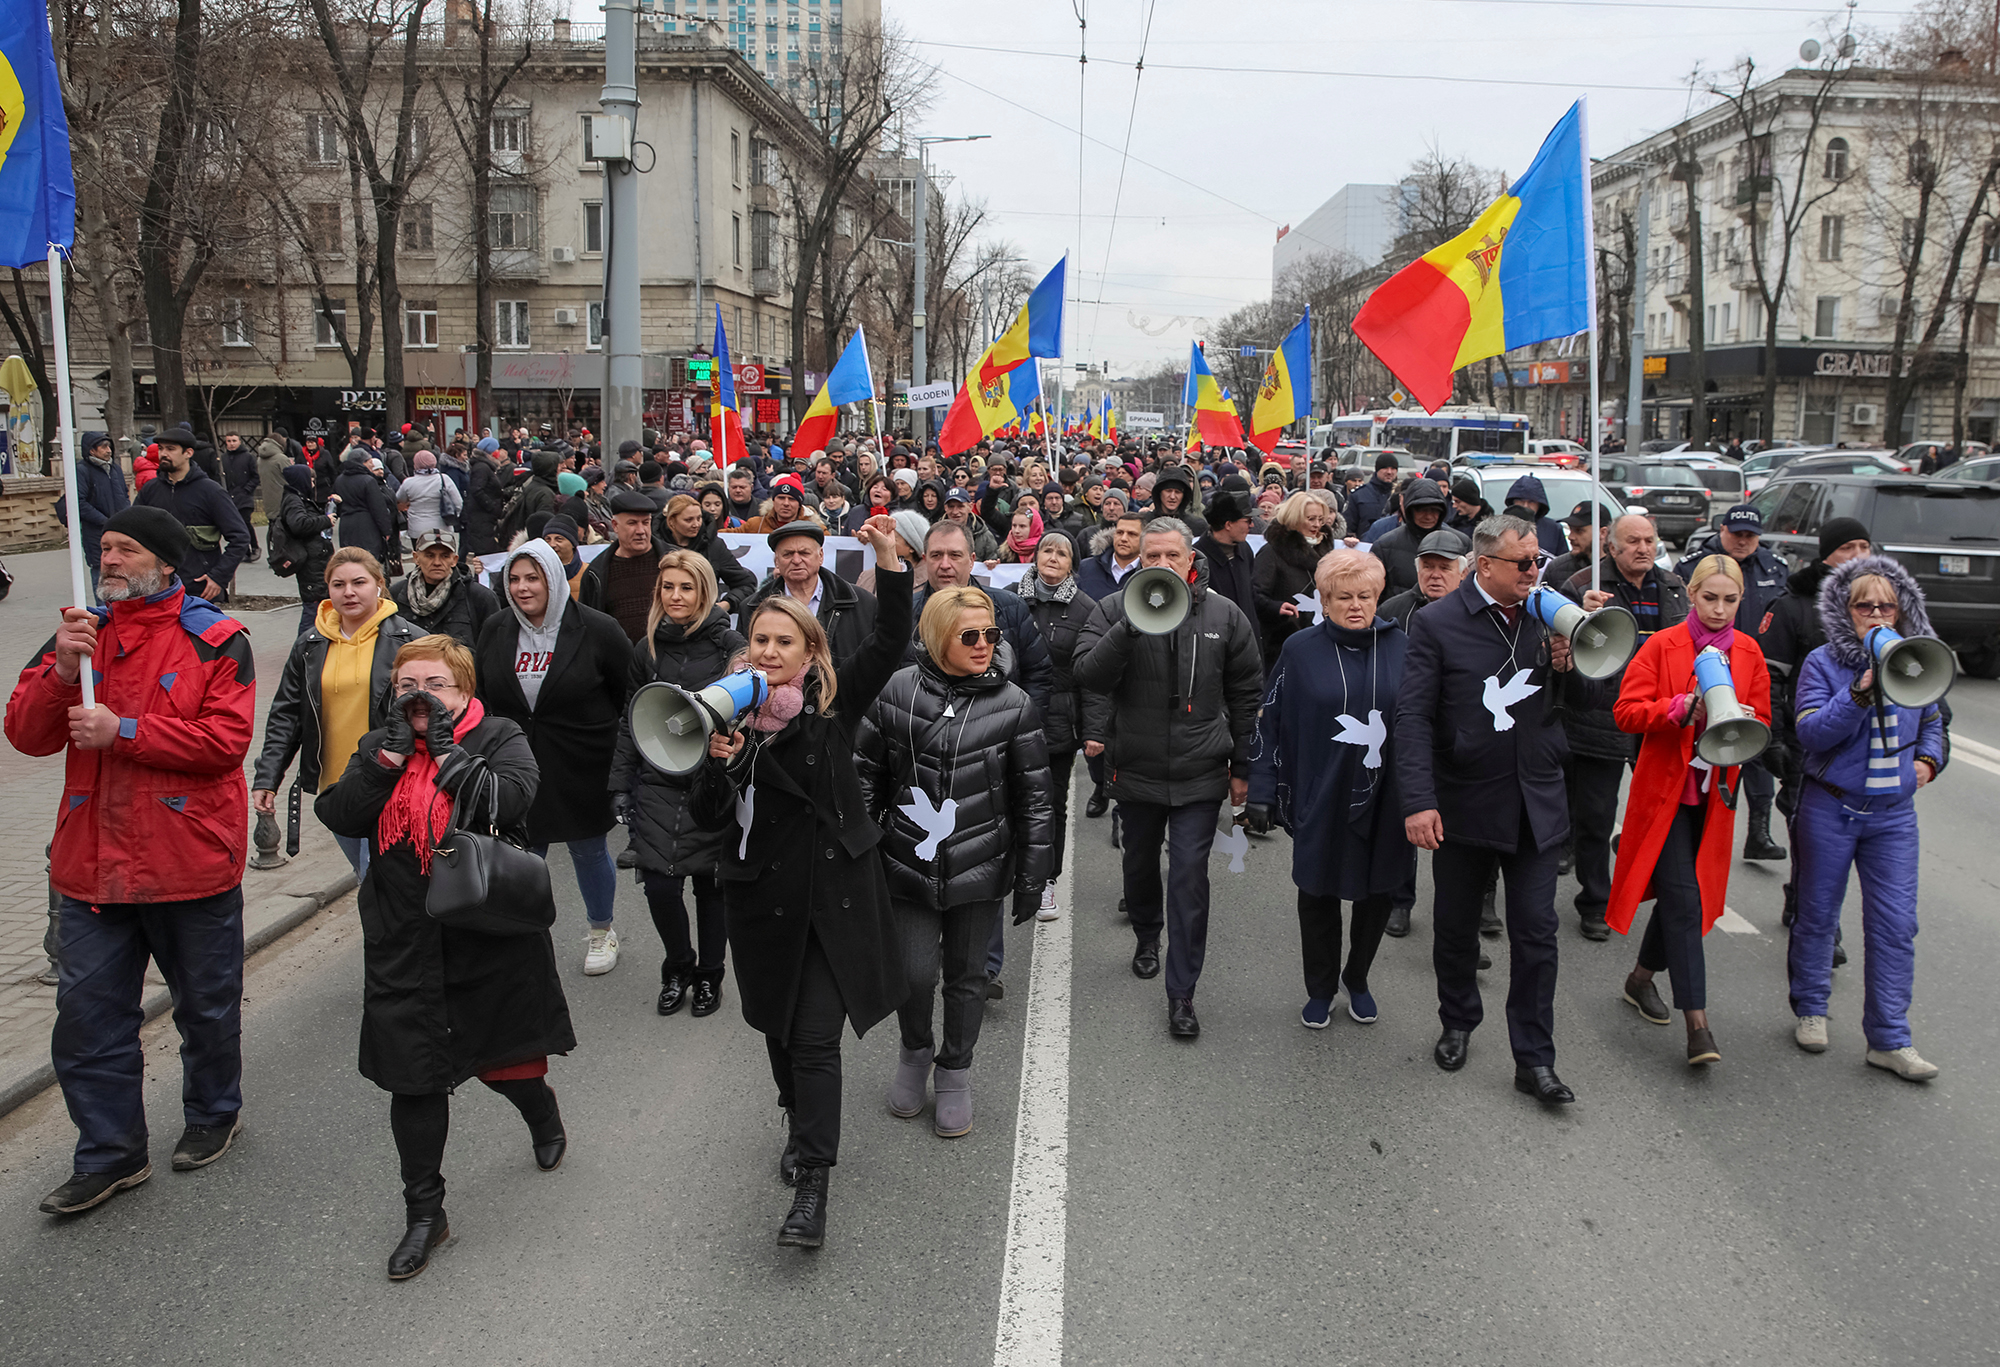 People take part in an opposition rally to protest against the recent countrywide increase of power rates and prices in Chisinau, Moldova, on February 28.